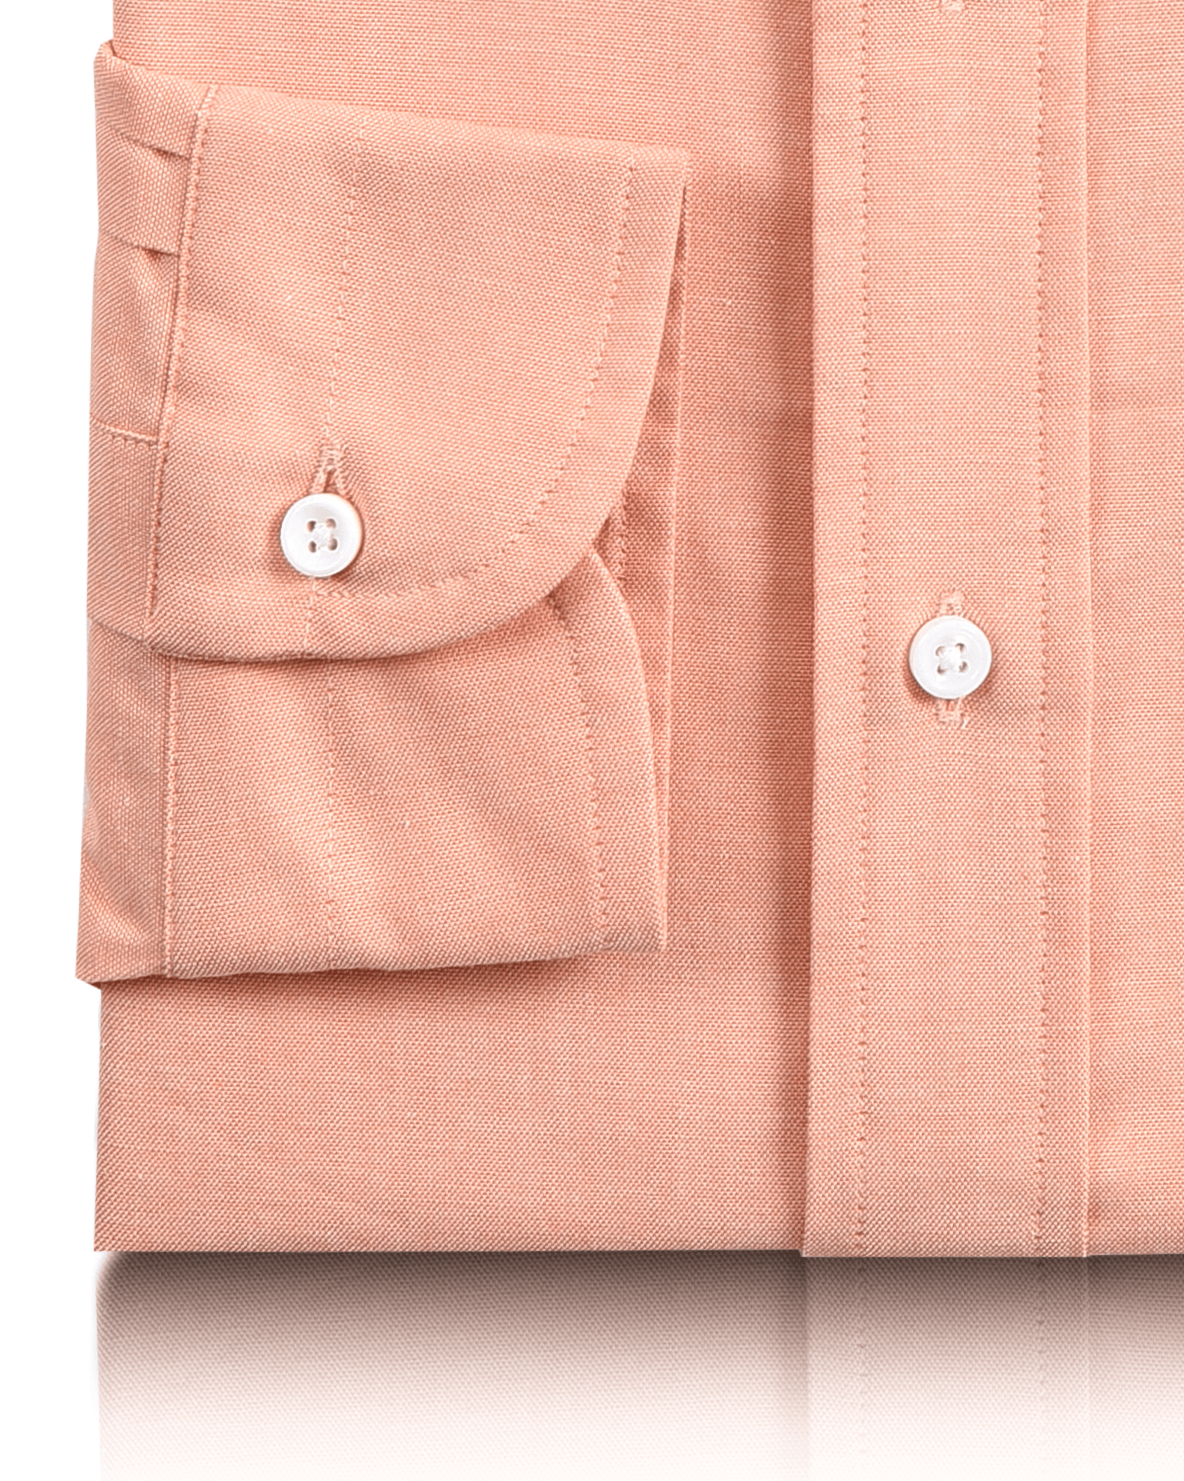 Cuff of the custom oxford shirt for men by Luxire in apricot